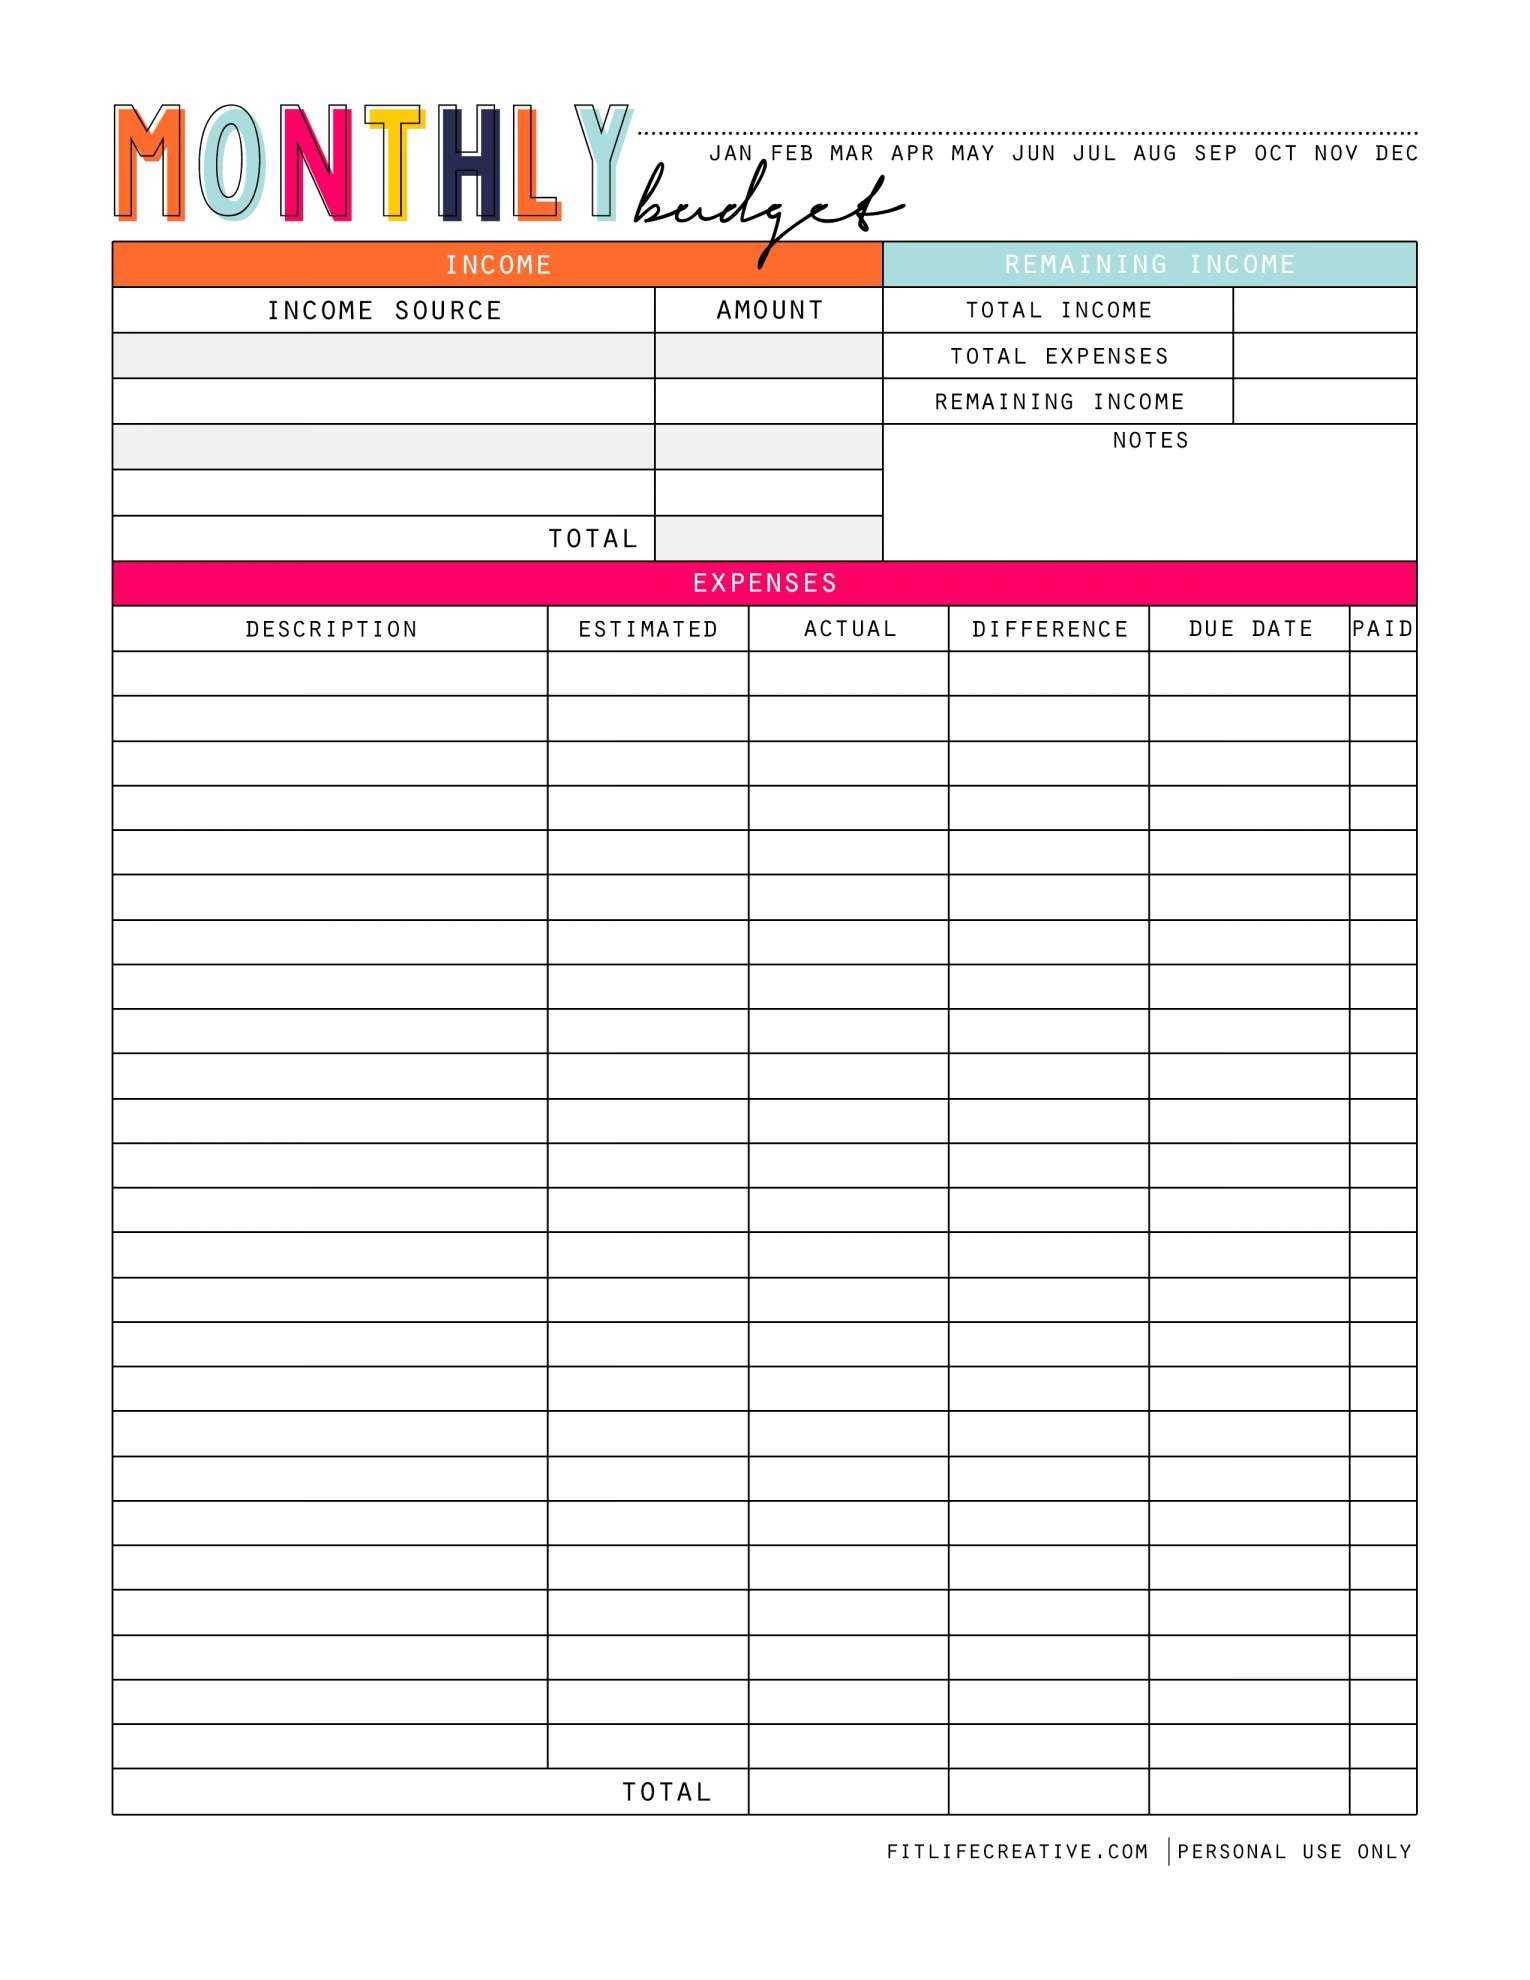 School Home Worksheets as Well as School Equipment Worksheet Save Business Expense Spreadsheet and